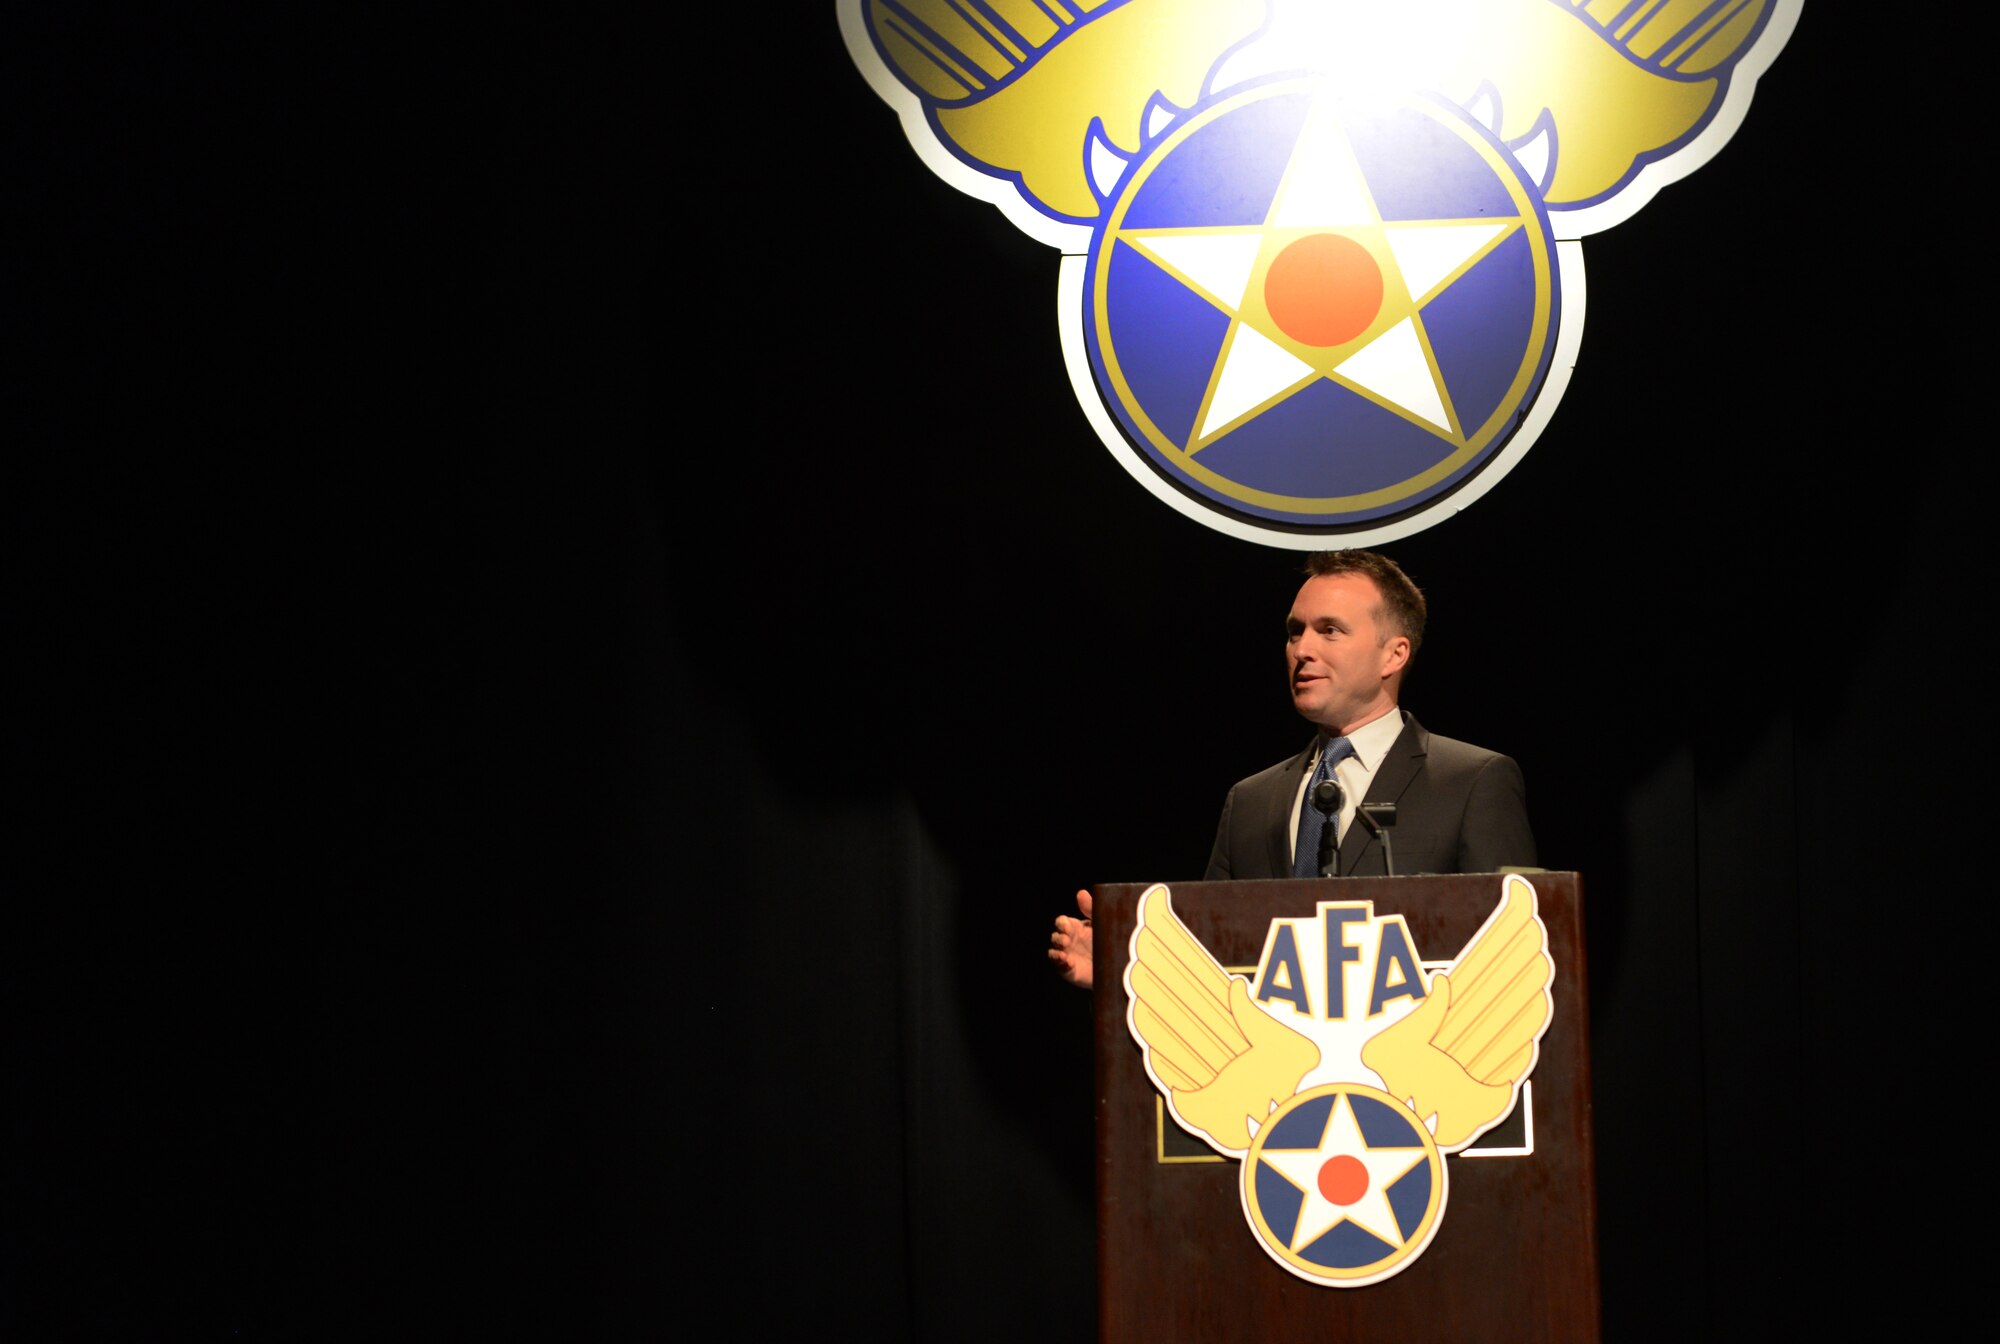 Acting Secretary of the Air Force Eric Fanning, addresses members of the Air Force Association Nov 22, 2013, during the AFA Pacific Air & Space Symposium, Los Angeles, Calif. Fanning spoke on the state of the force and the Air Force’s position in space and cyberspace.